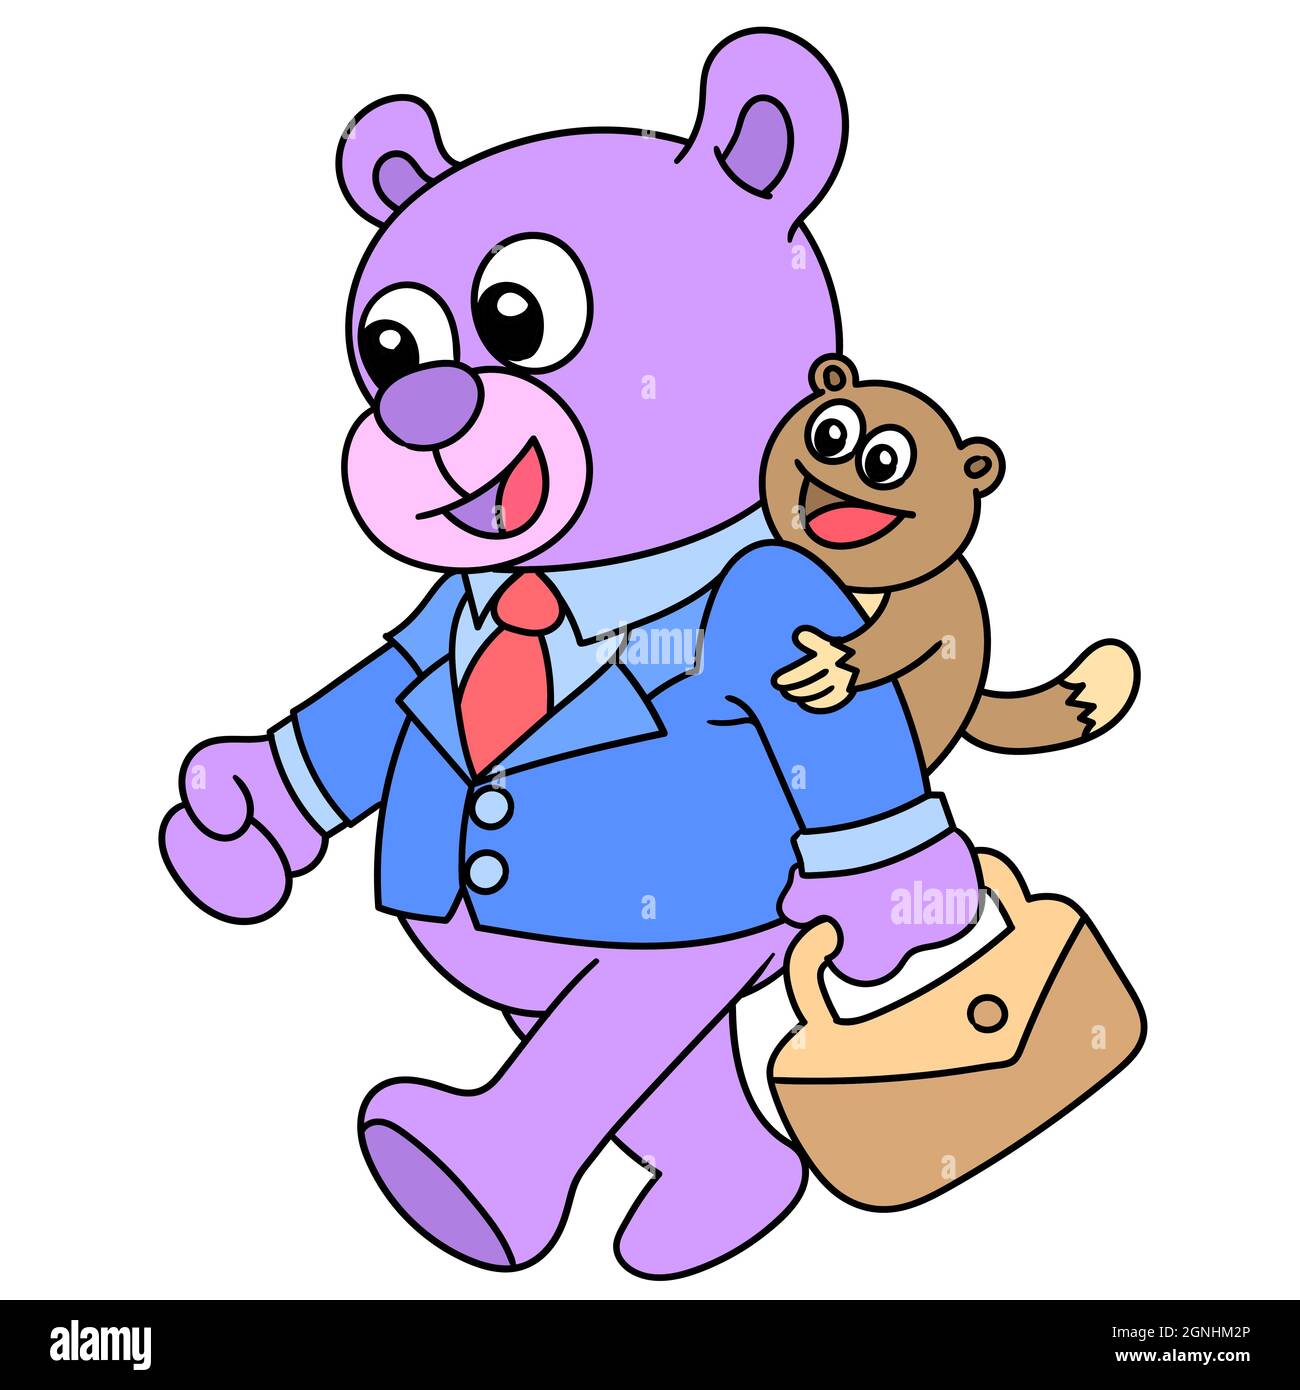 mr. bear went to the office wearing a neat suit Stock Vector